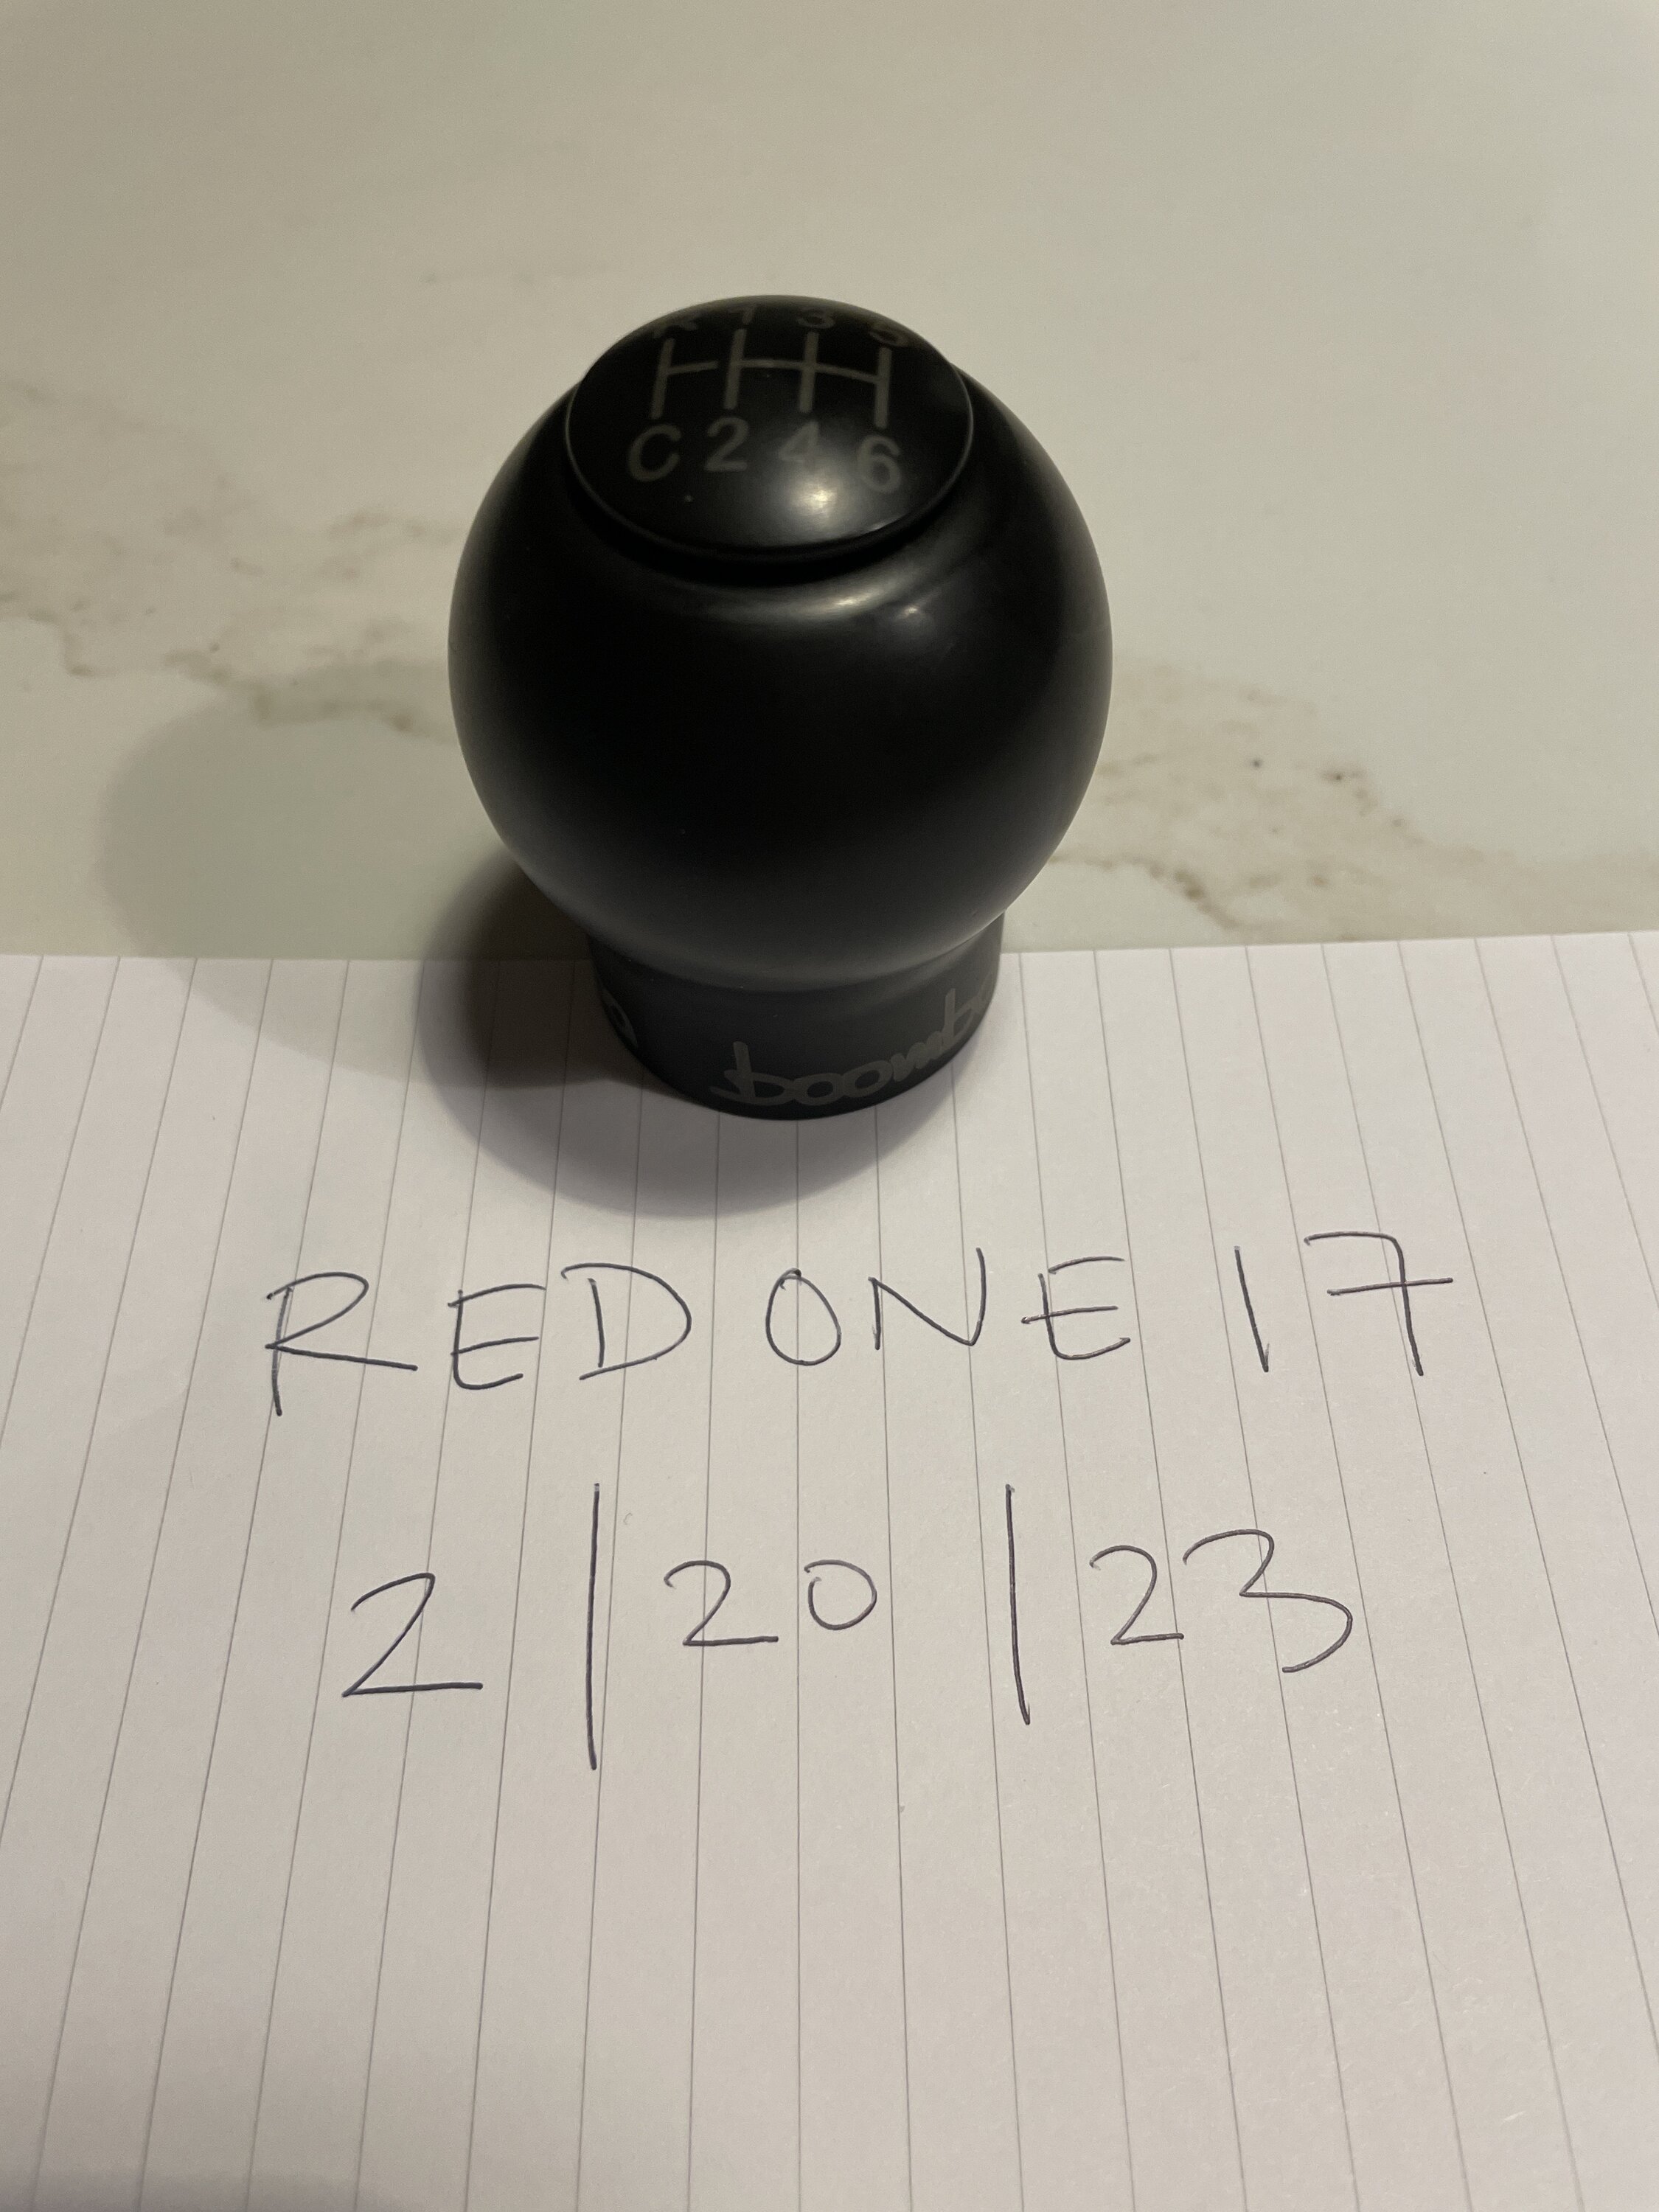 Ford Bronco Boomba Racing - Weighted Shift Knob - $50 image